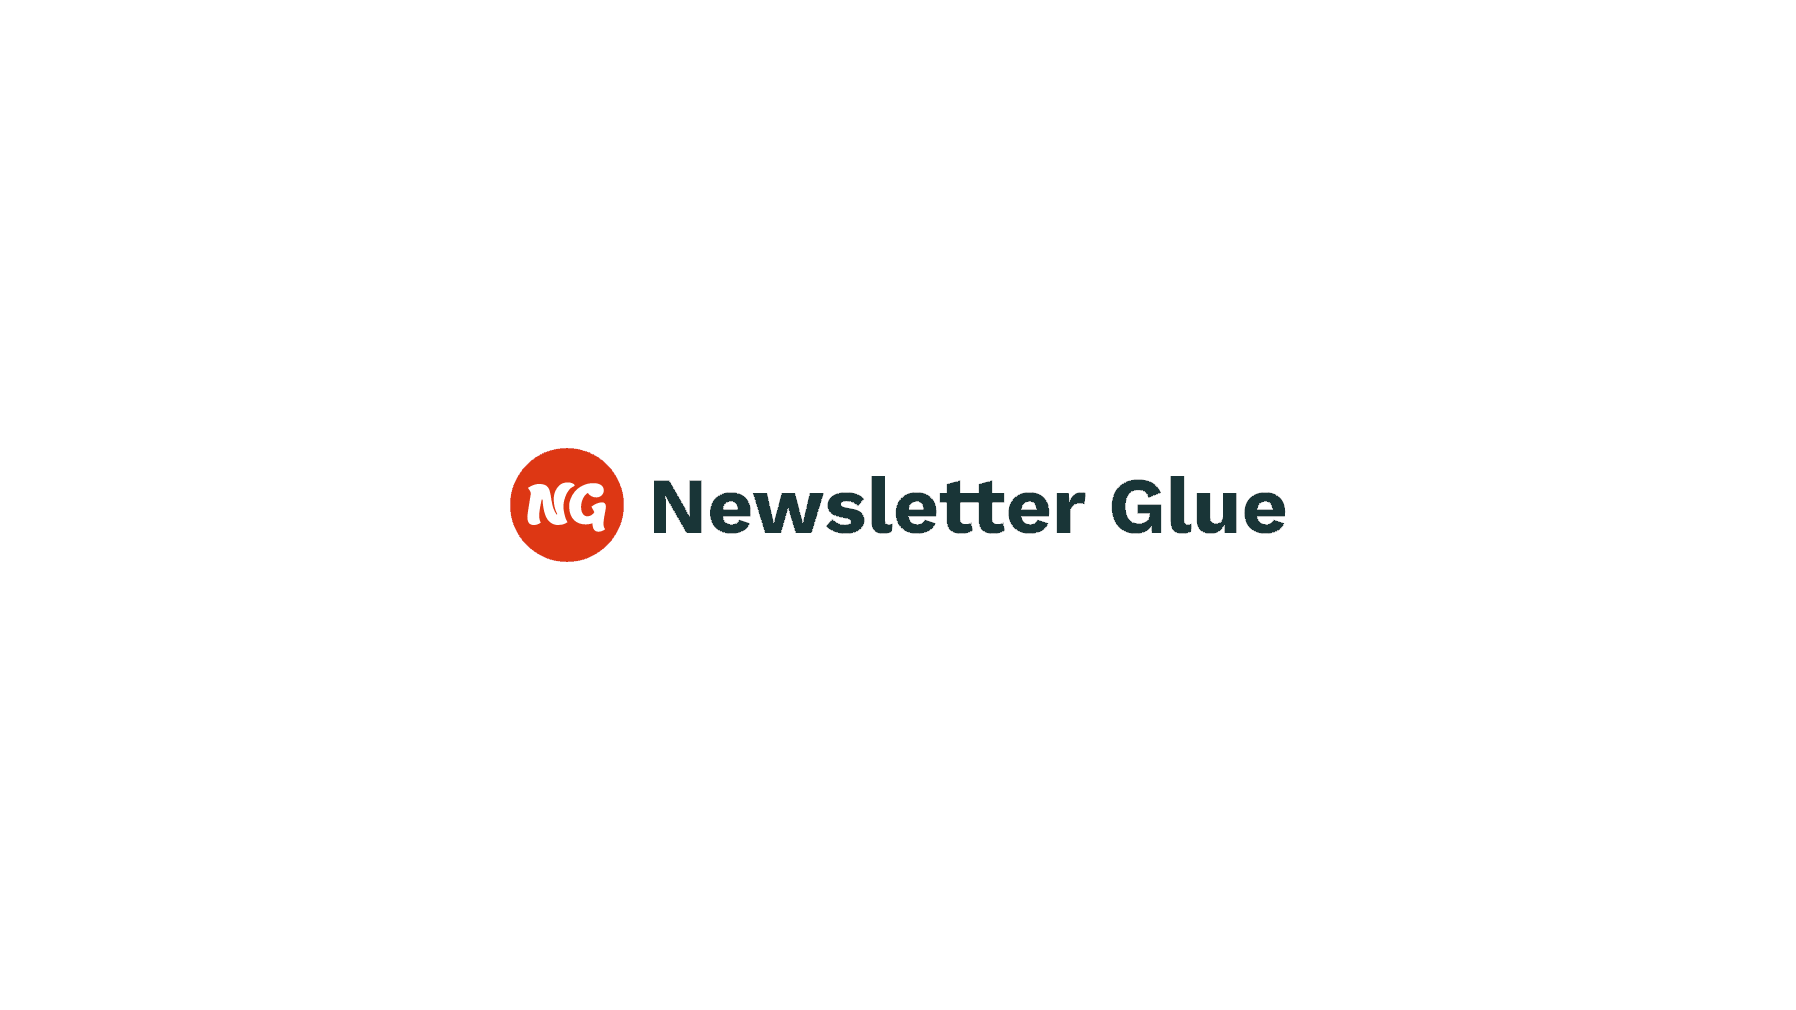 Newsletter Glue Version 2 Rebuilds Settings Interface With Block Components, Sets Foundation for New Features